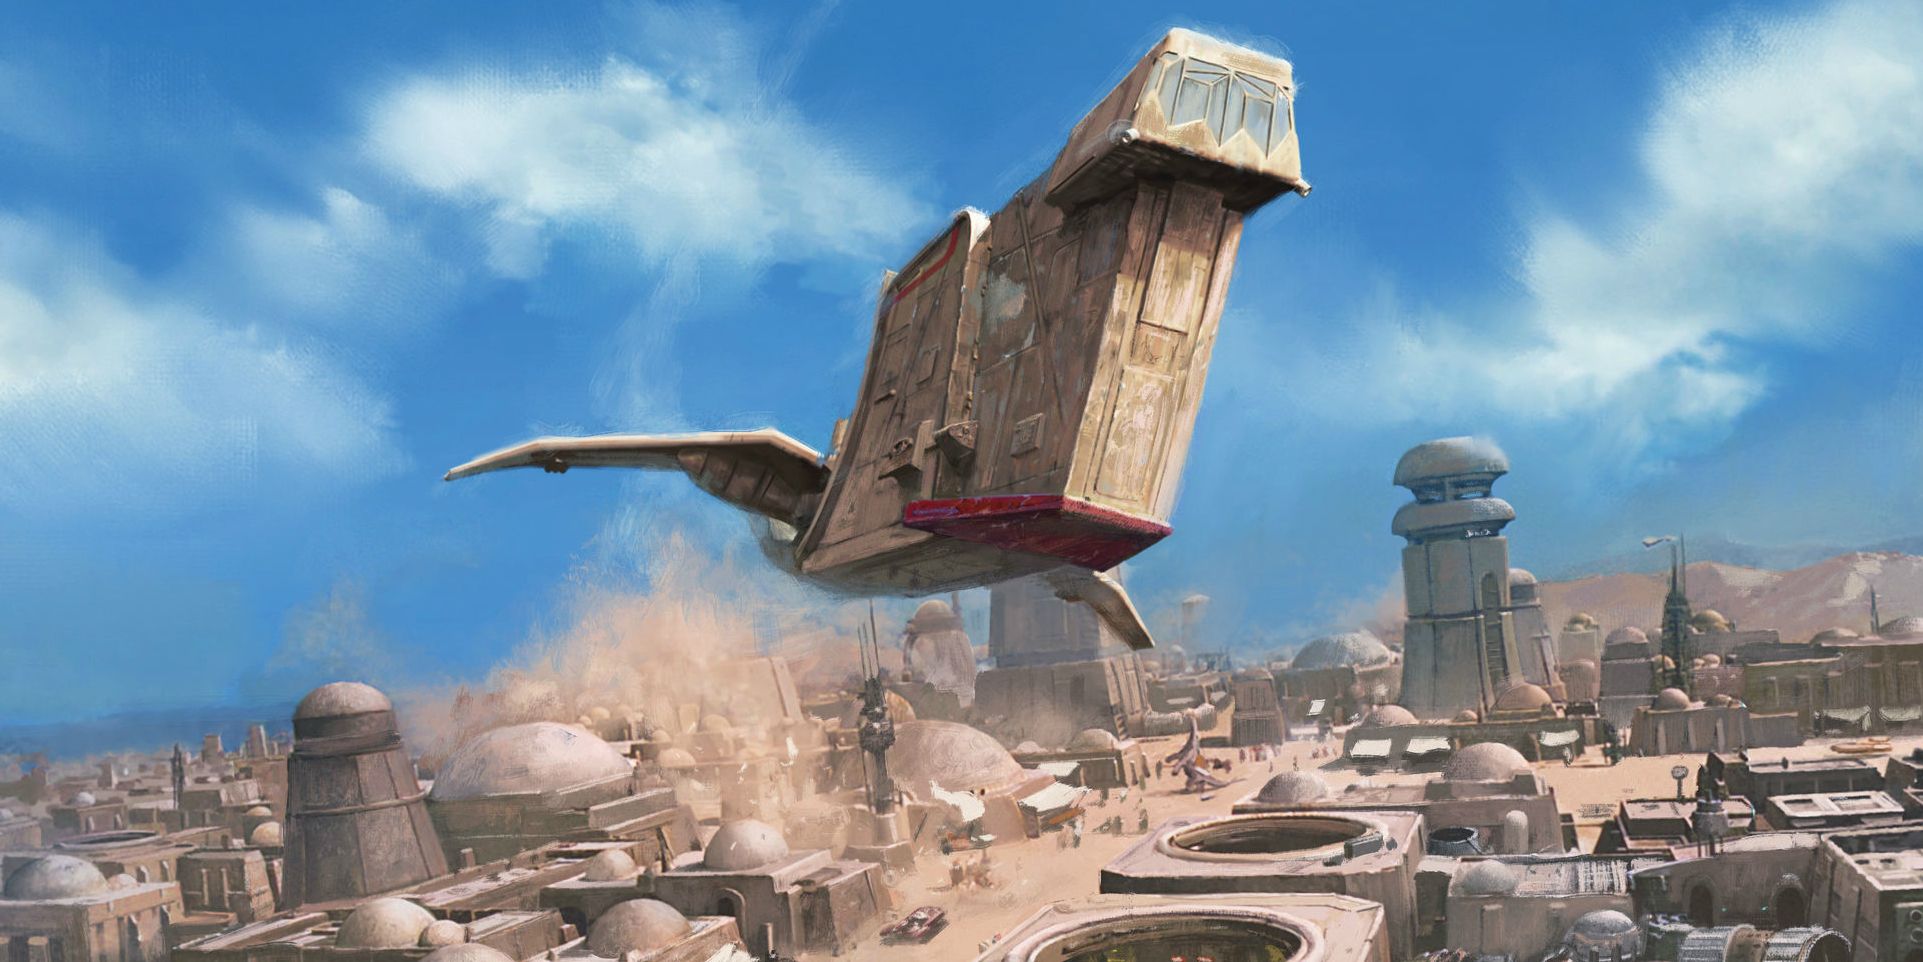 Bossk's Ship the Hound's Tooth in Star Wars